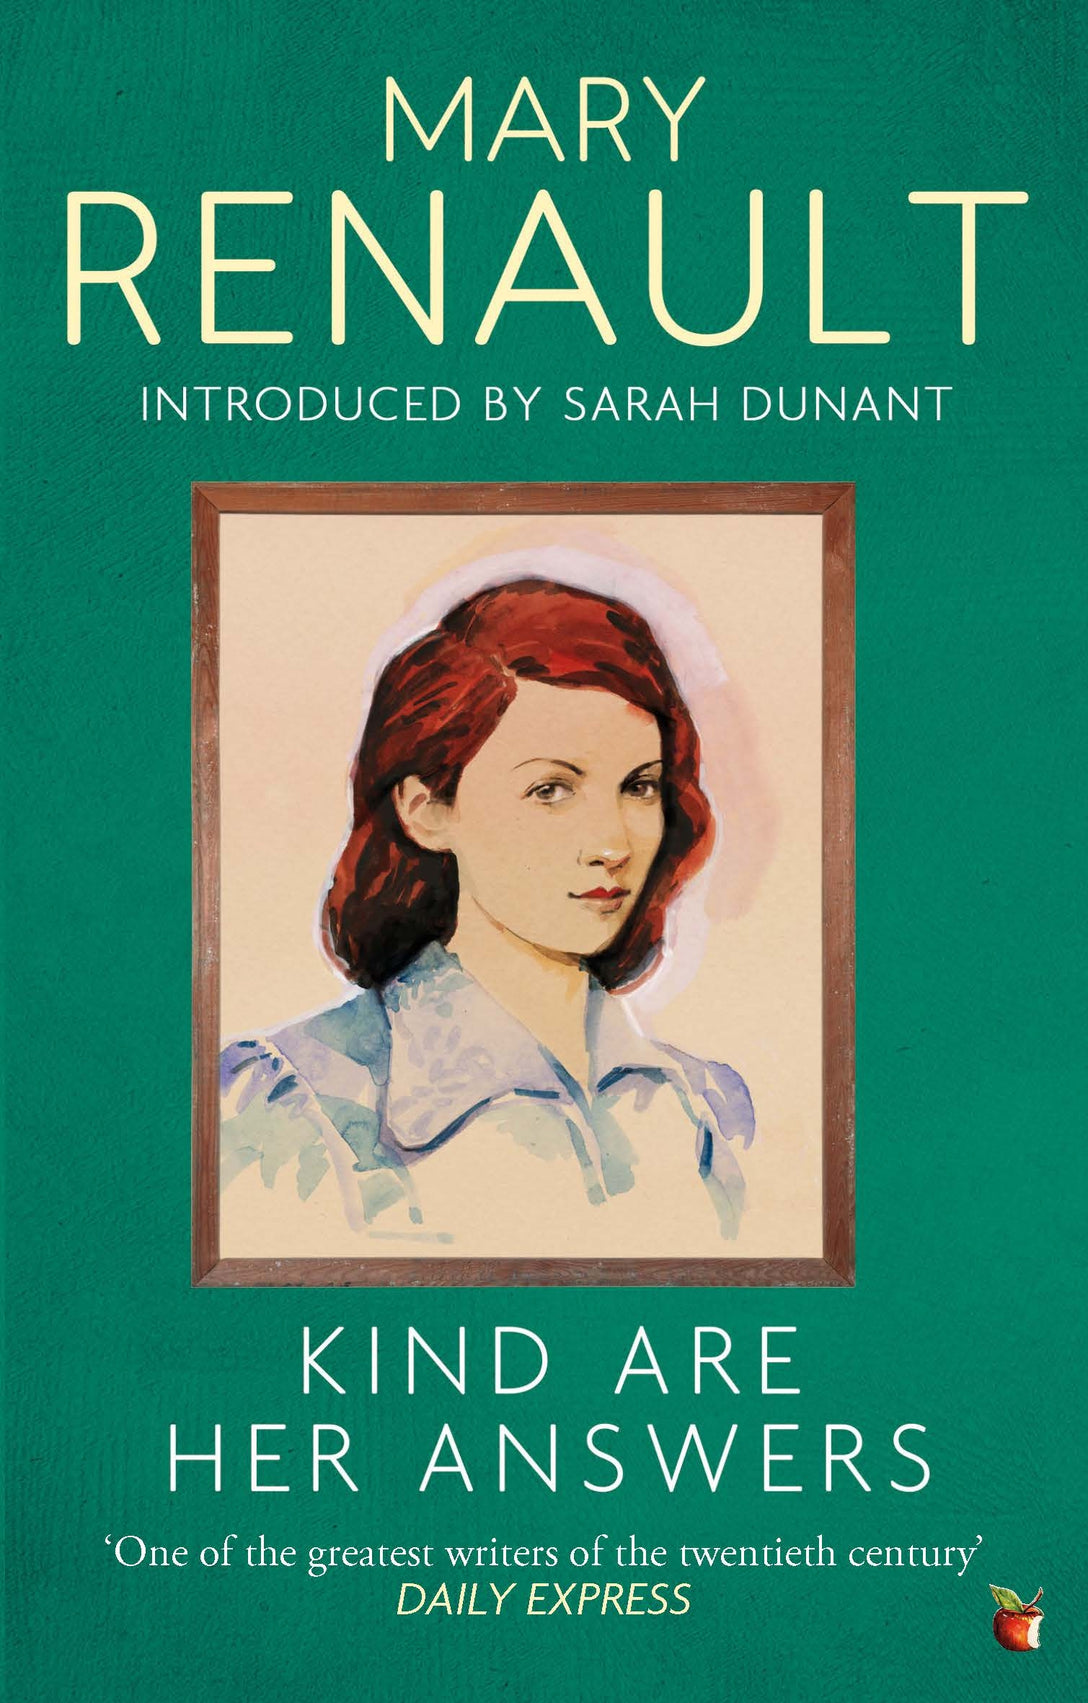 Kind Are Her Answers by Mary Renault